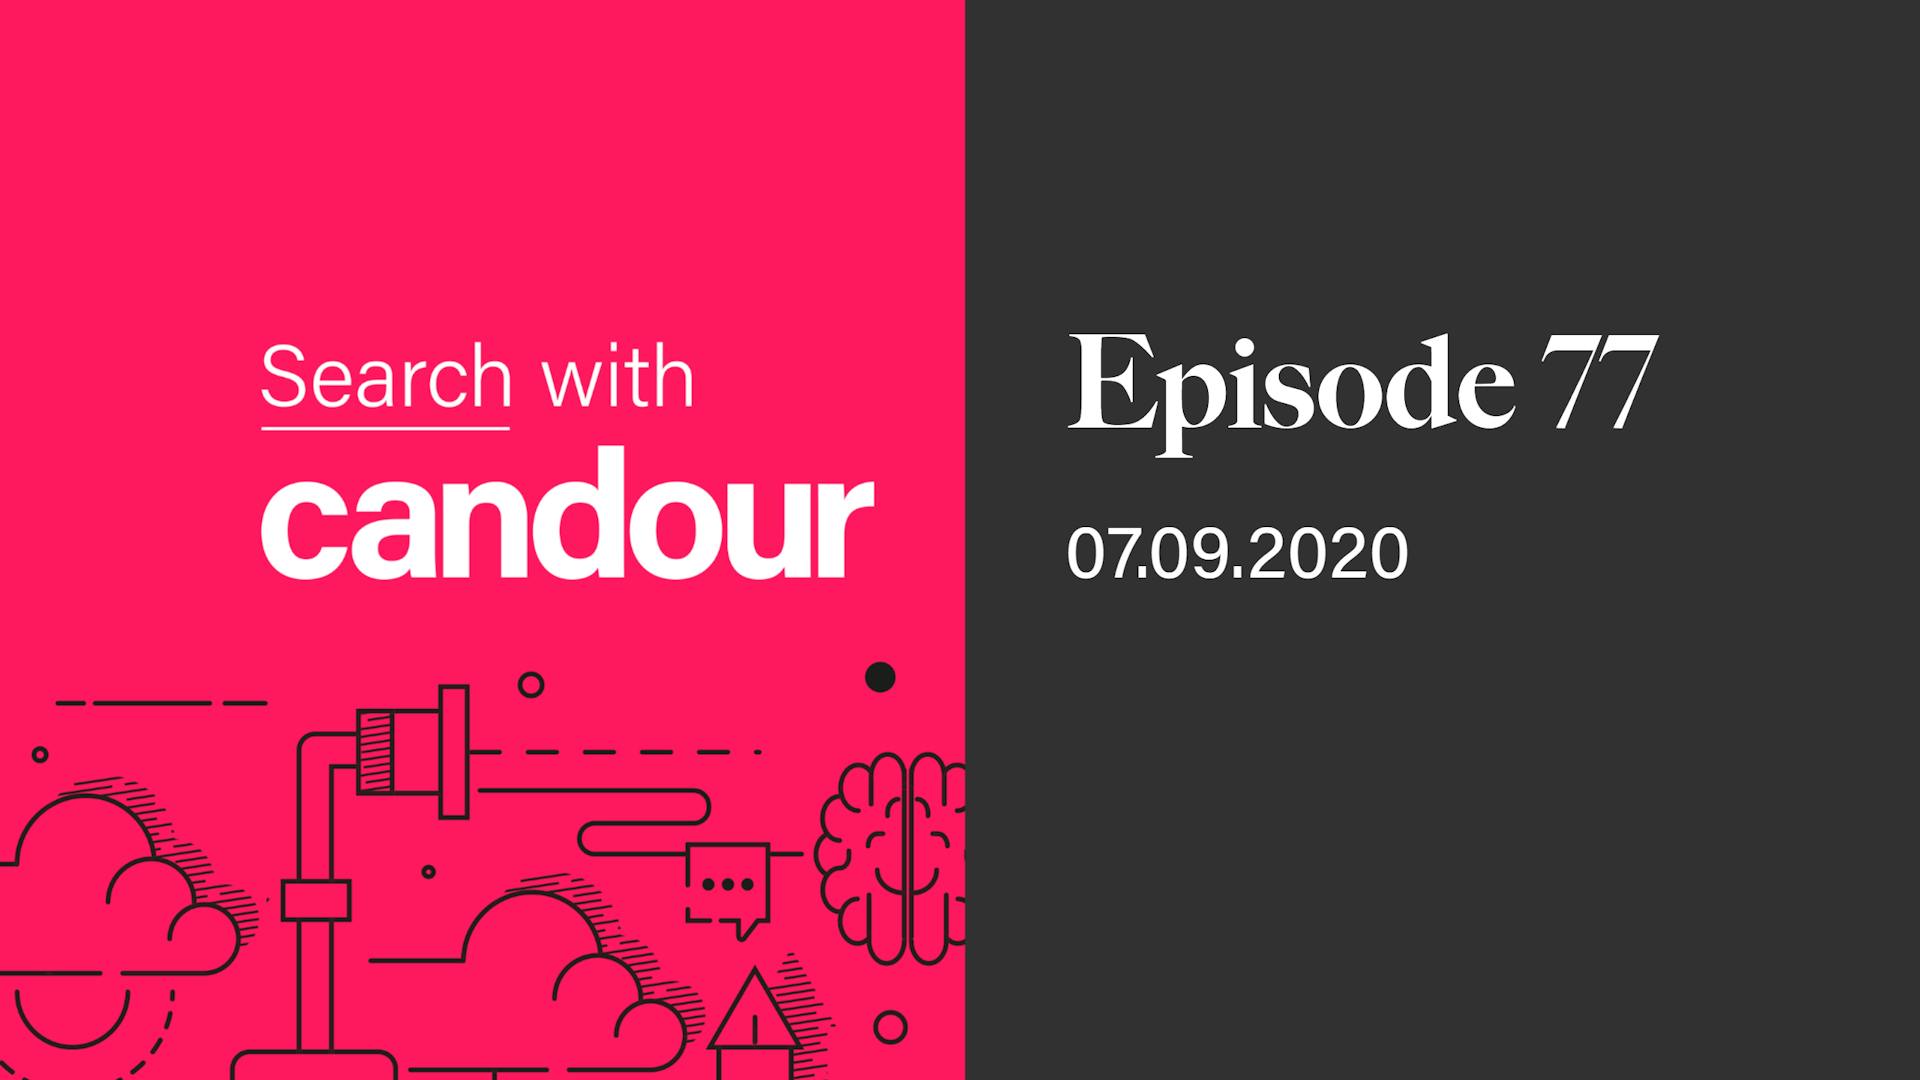 Episode 77 - Search with Candour